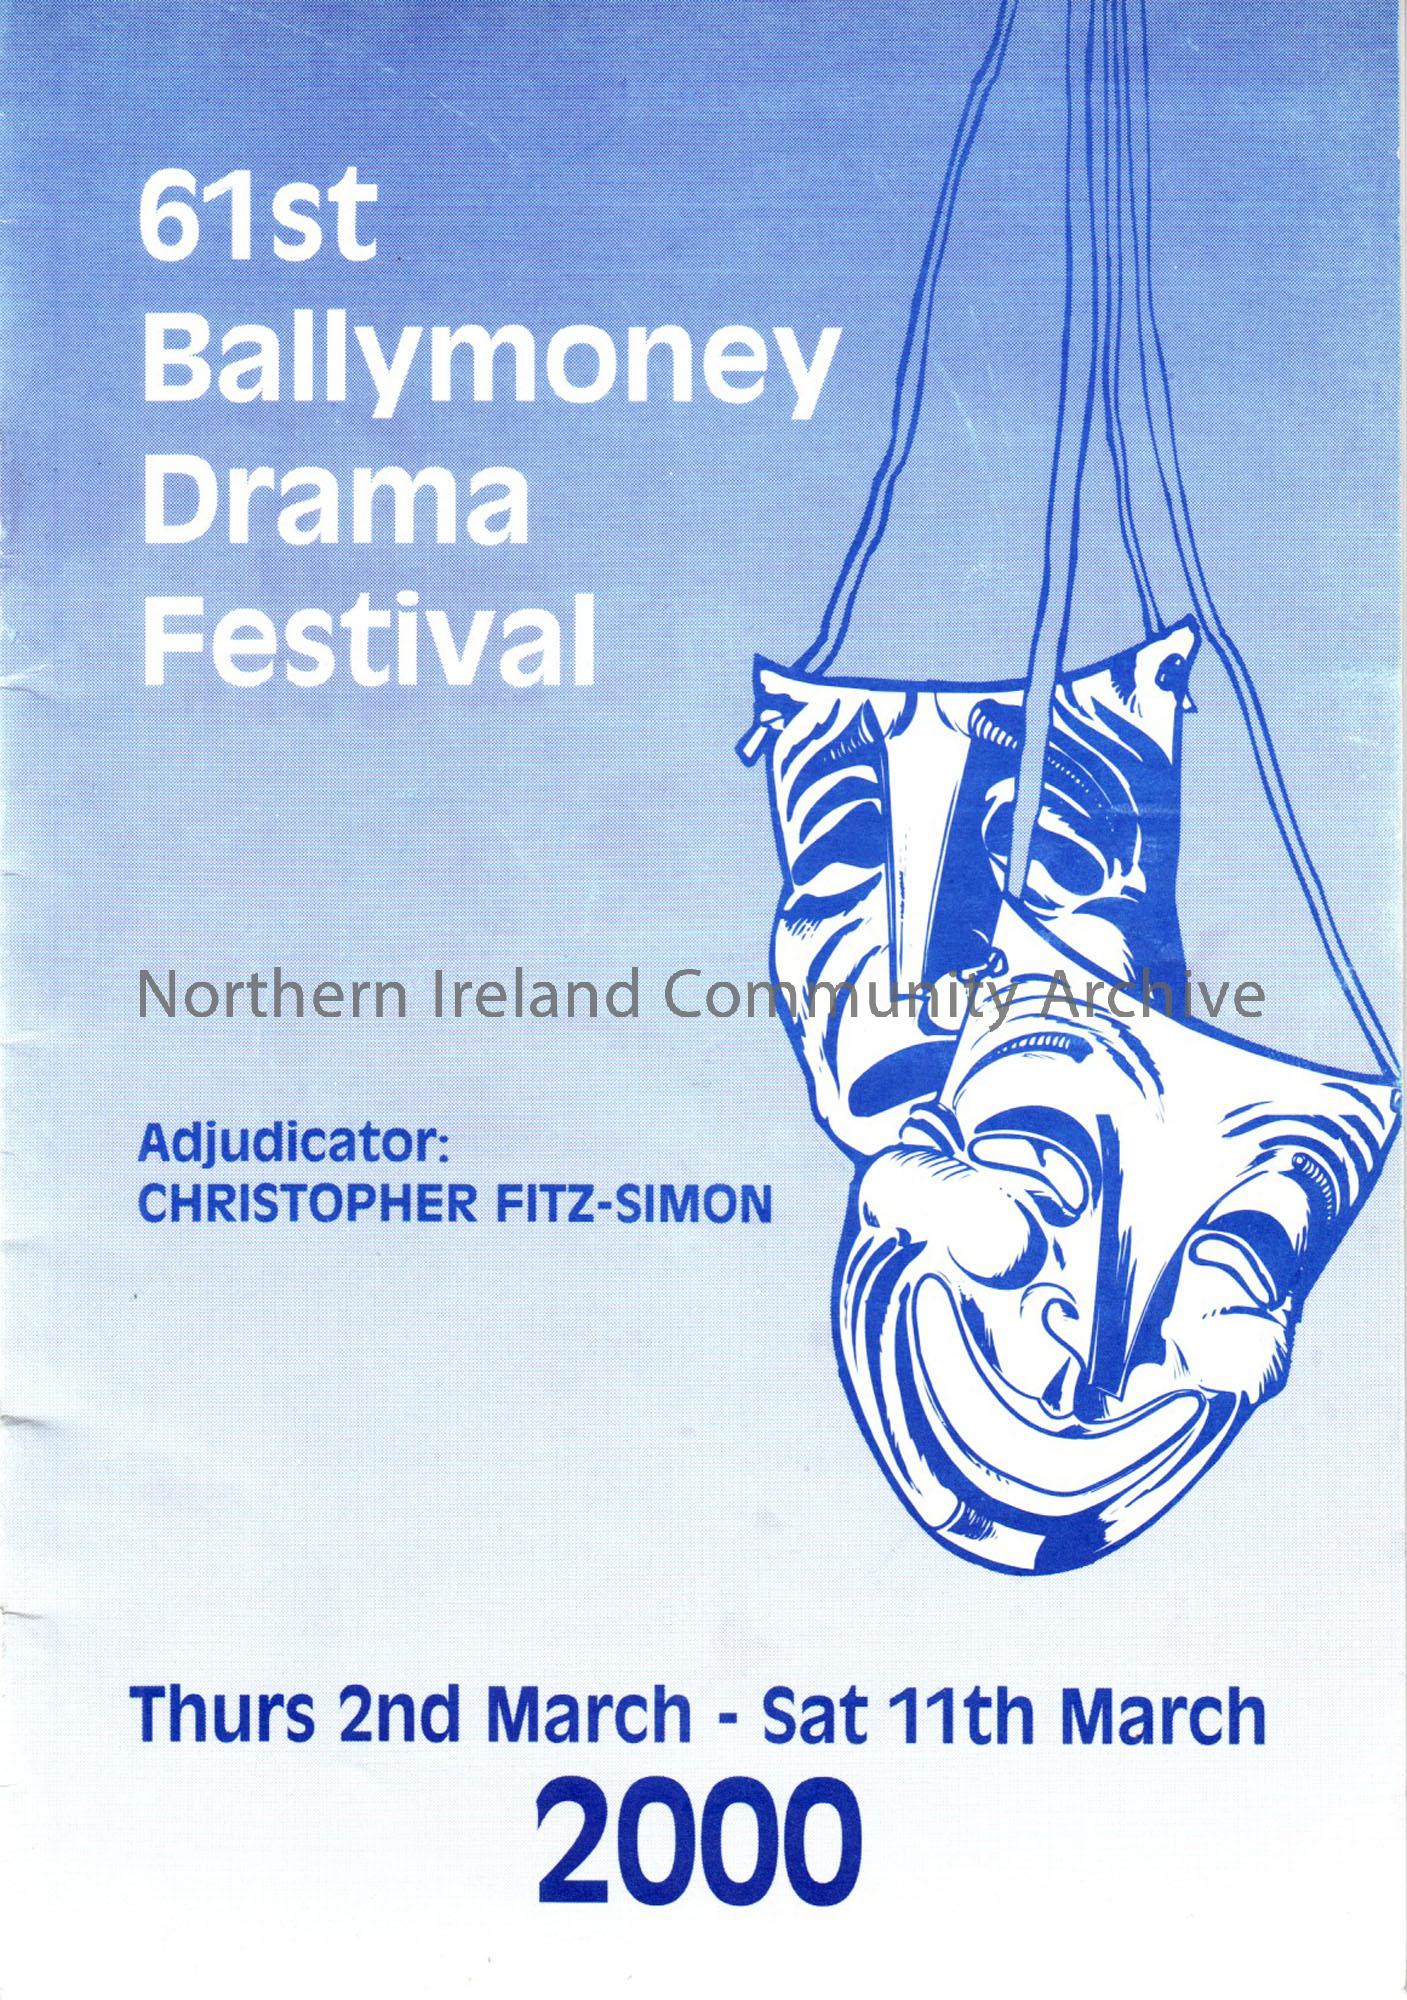 Programme of 61st Ballymoney Drama Festival,2000 2nd March to 11th March